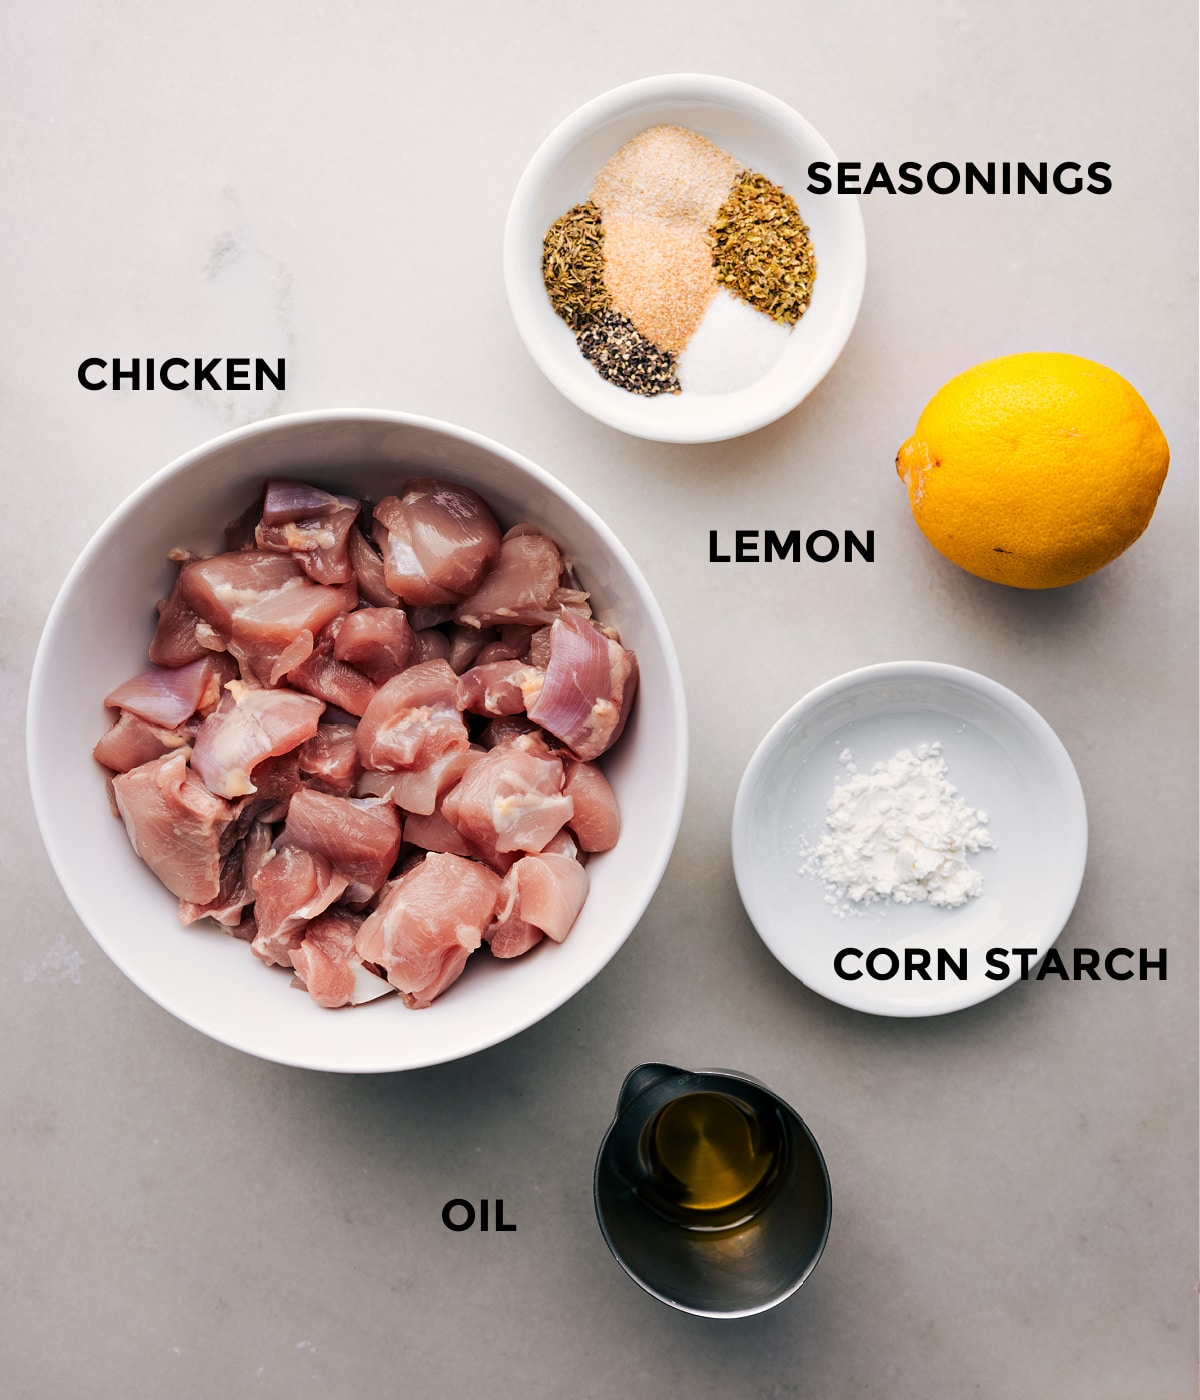 All the ingredients in this recipe prepped out for easy assembly.